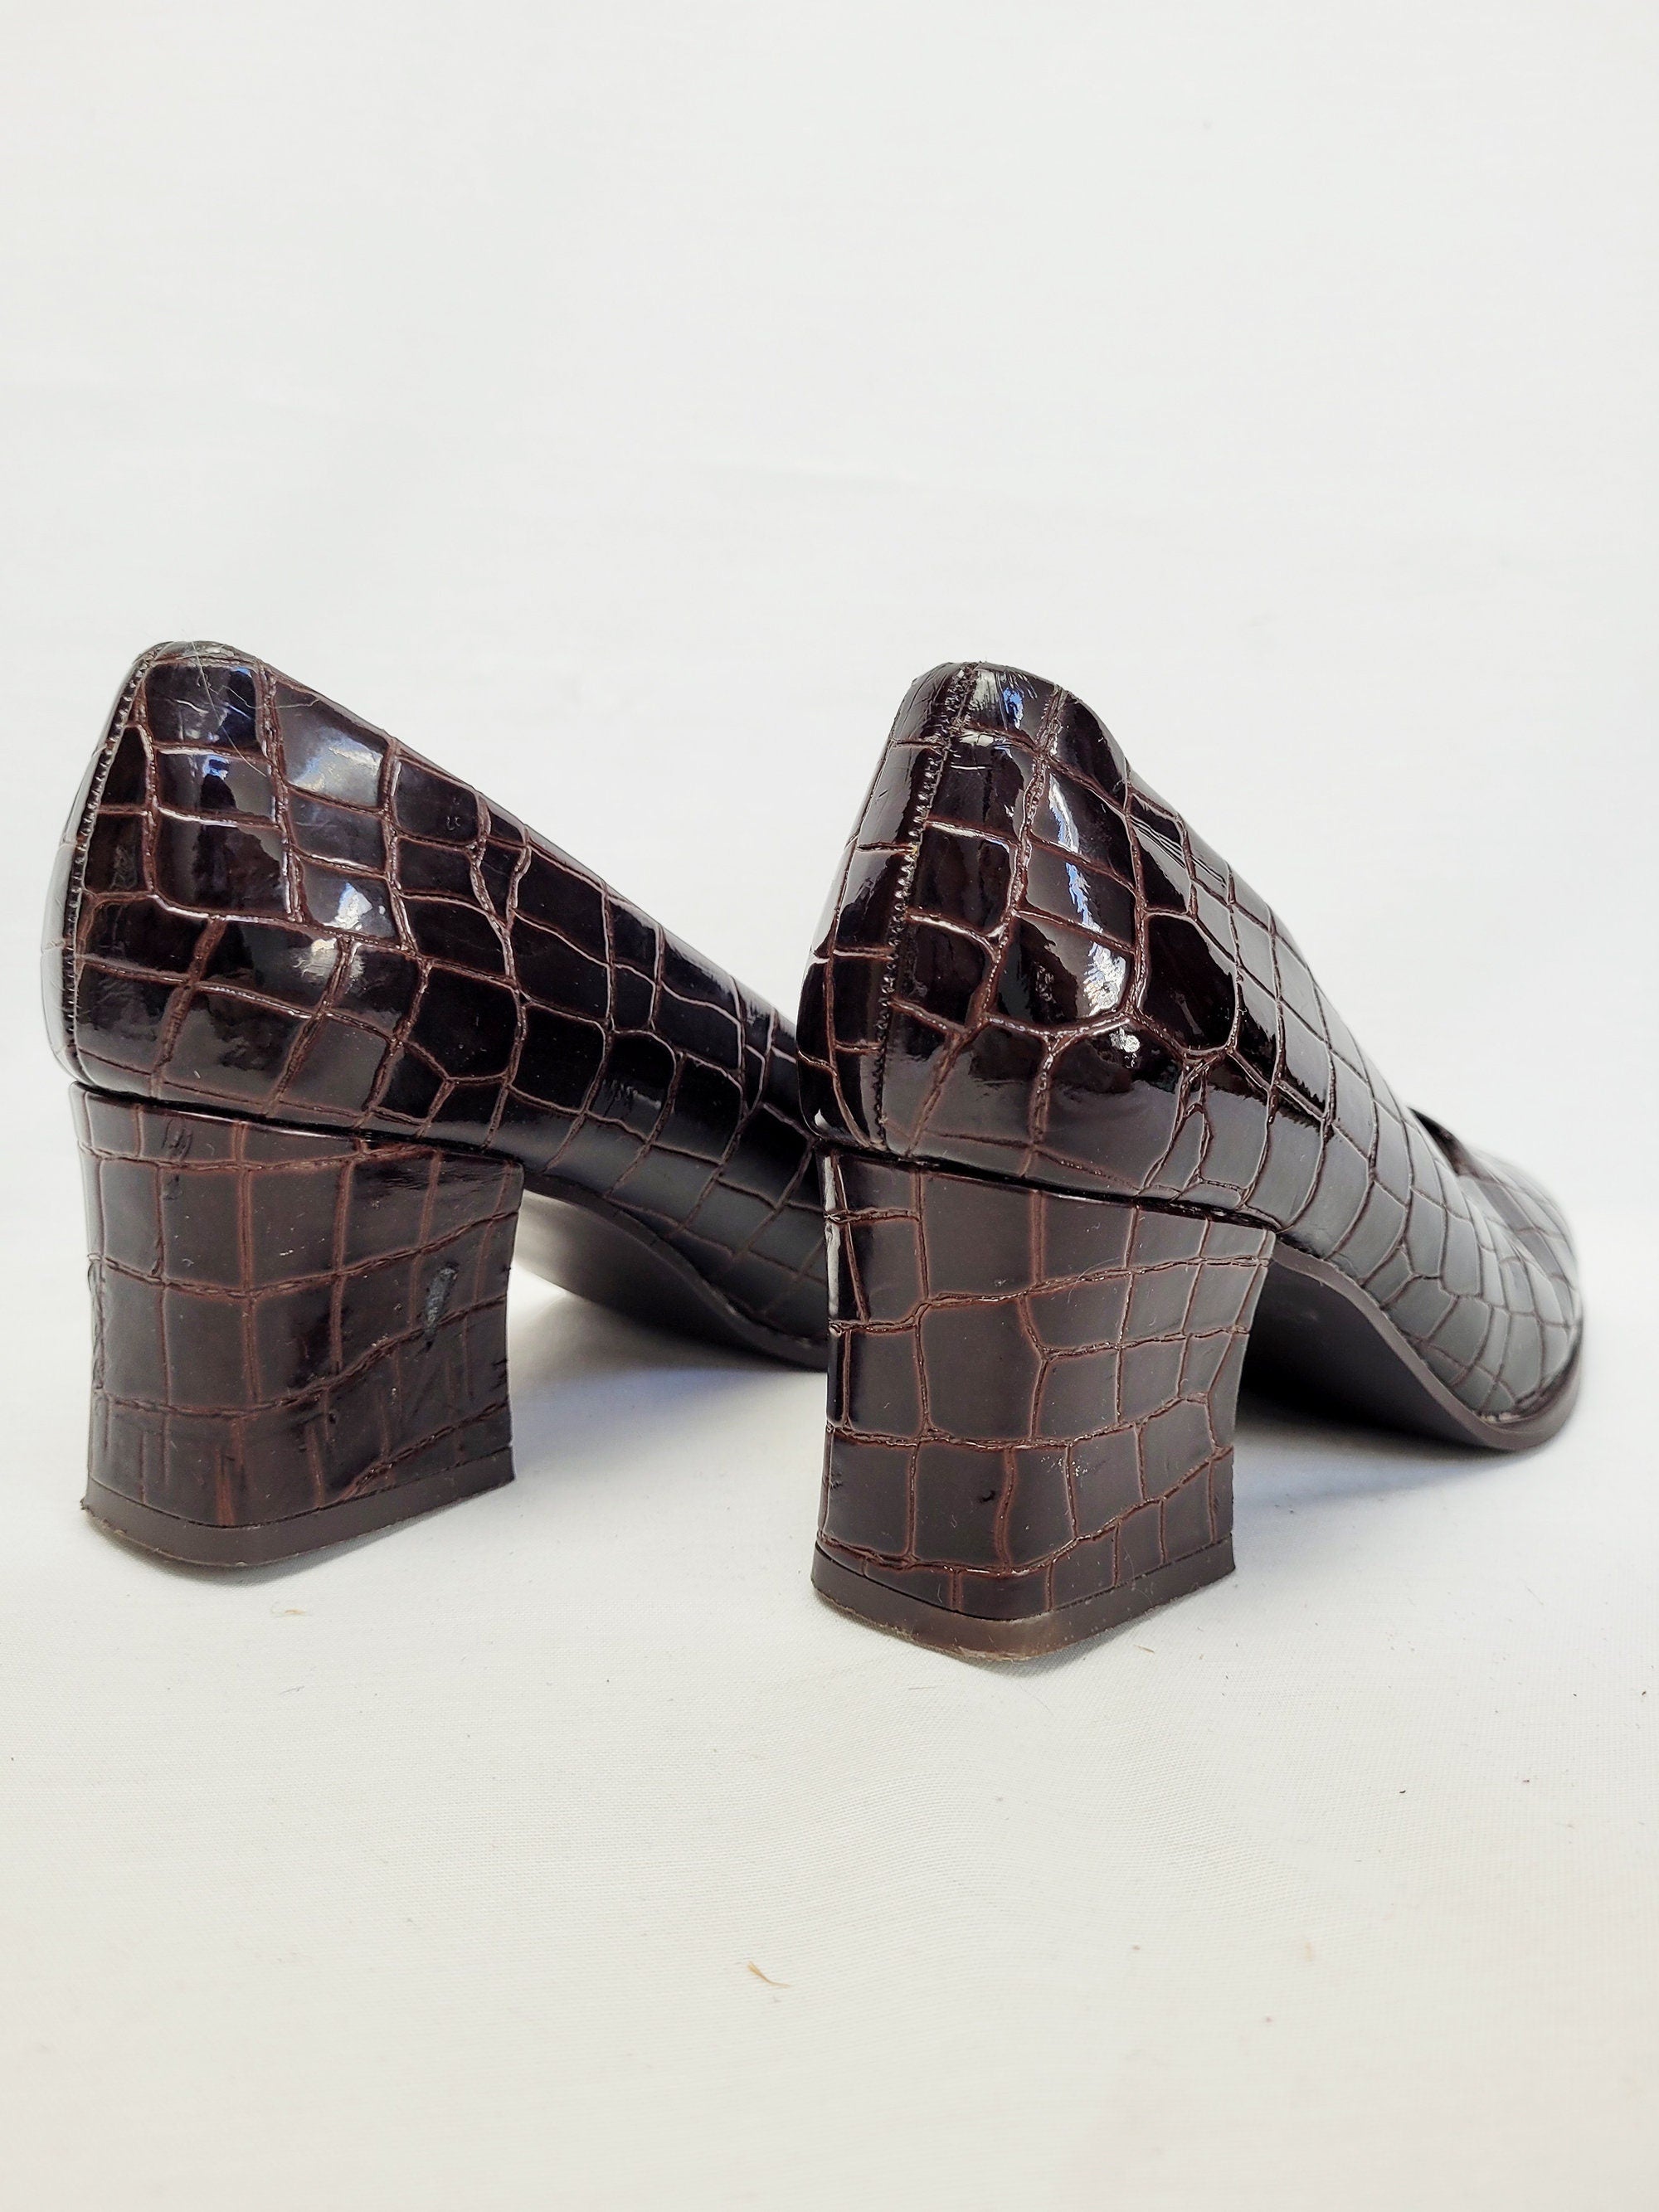 Vintage 90s brown glossy reptile print square toe shoes